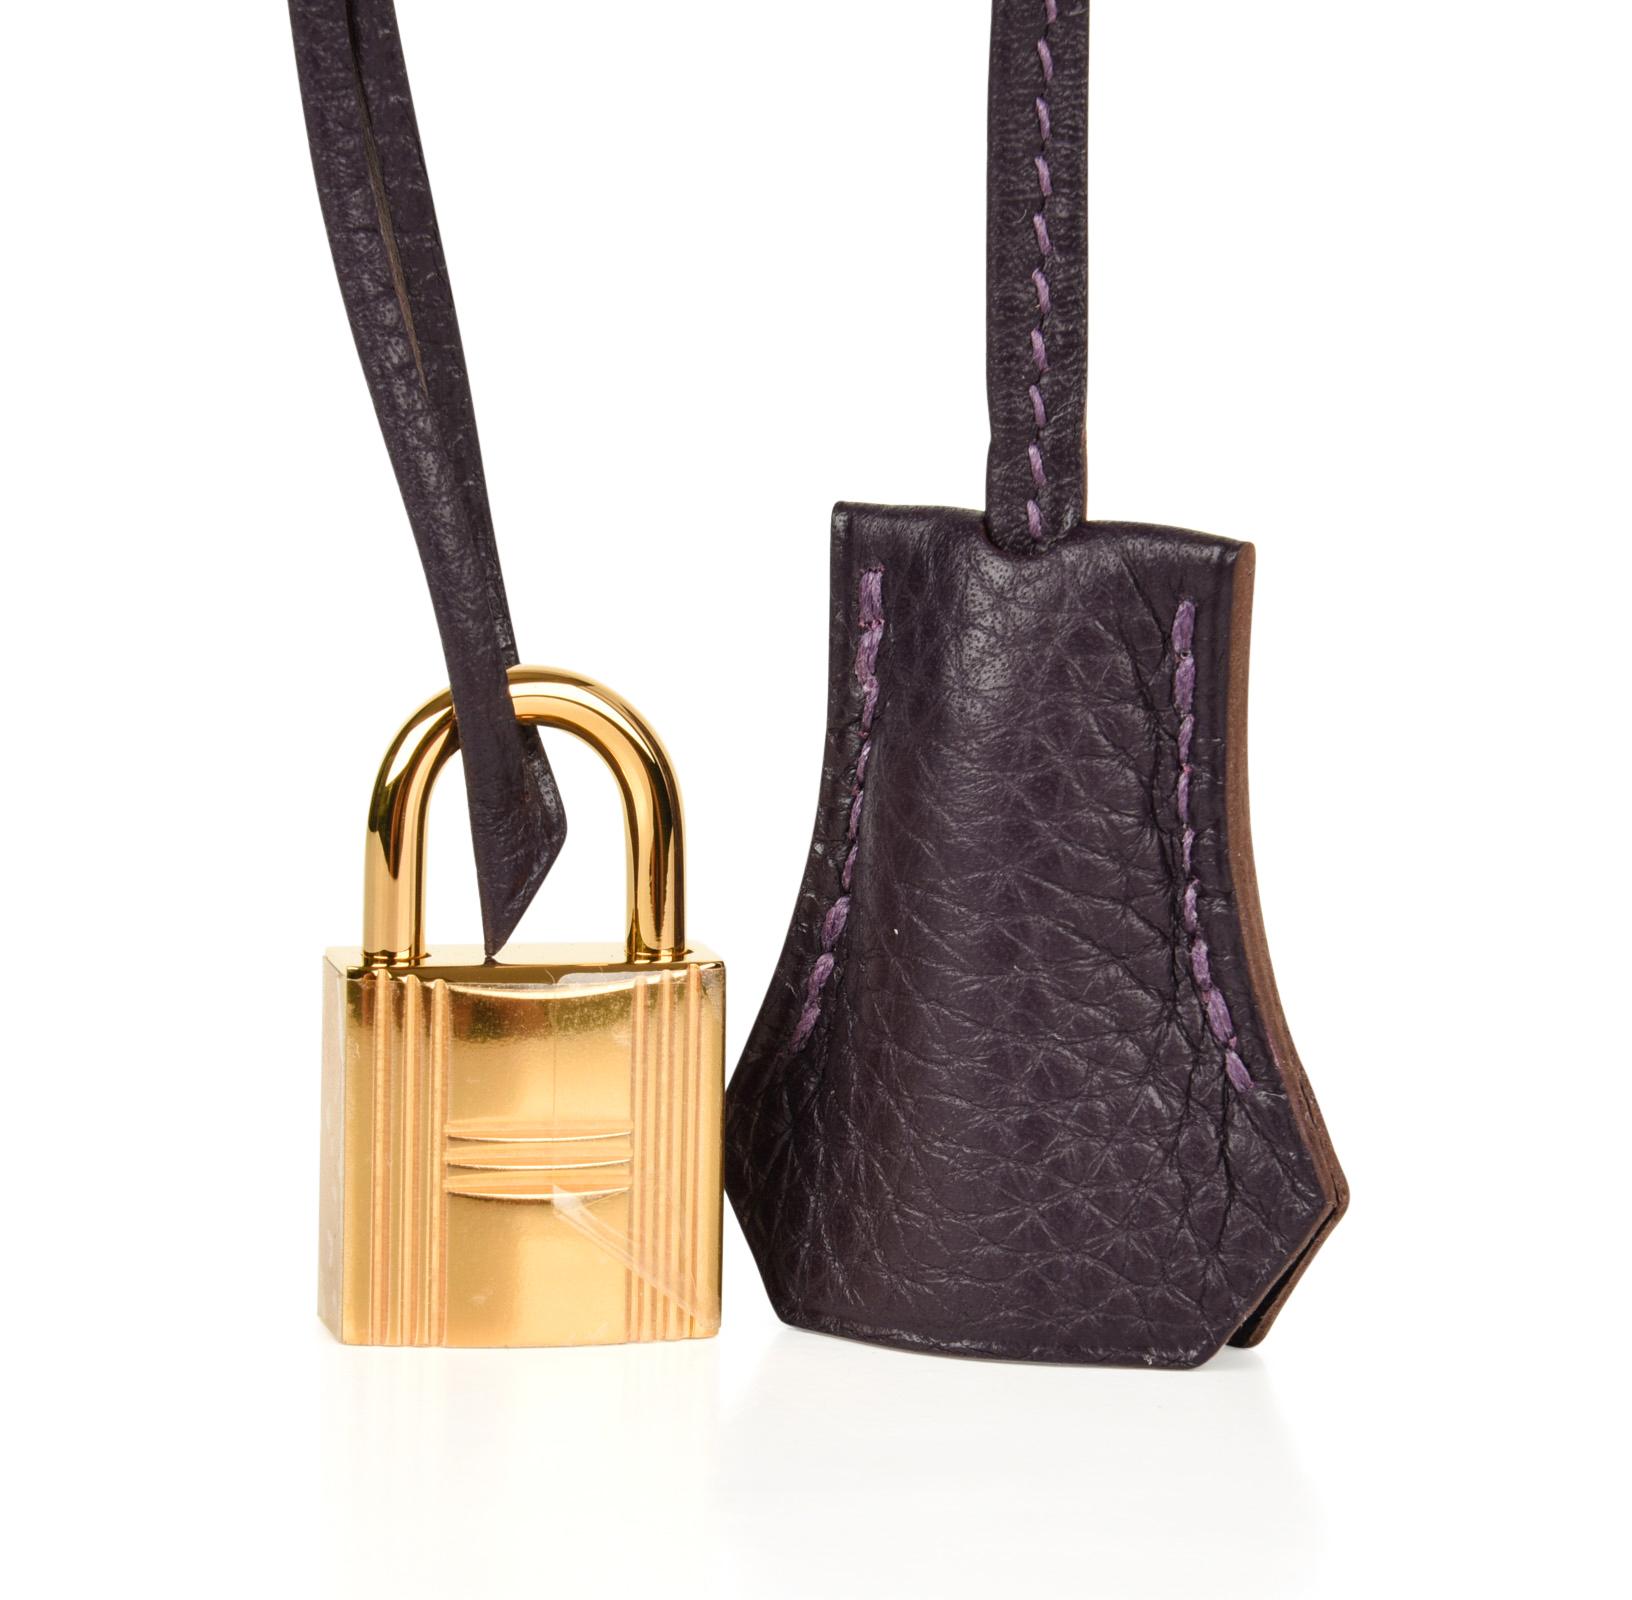 Coveted Raisin is re introduced in the original rich jewel tone.
Fabulous neutral colour worn like a black bag.
Divine with Gold hardware. 
Togo leather which is  scratch resistant and so luscious to the touch!
NEW or NEVER WORN. 
Comes with the